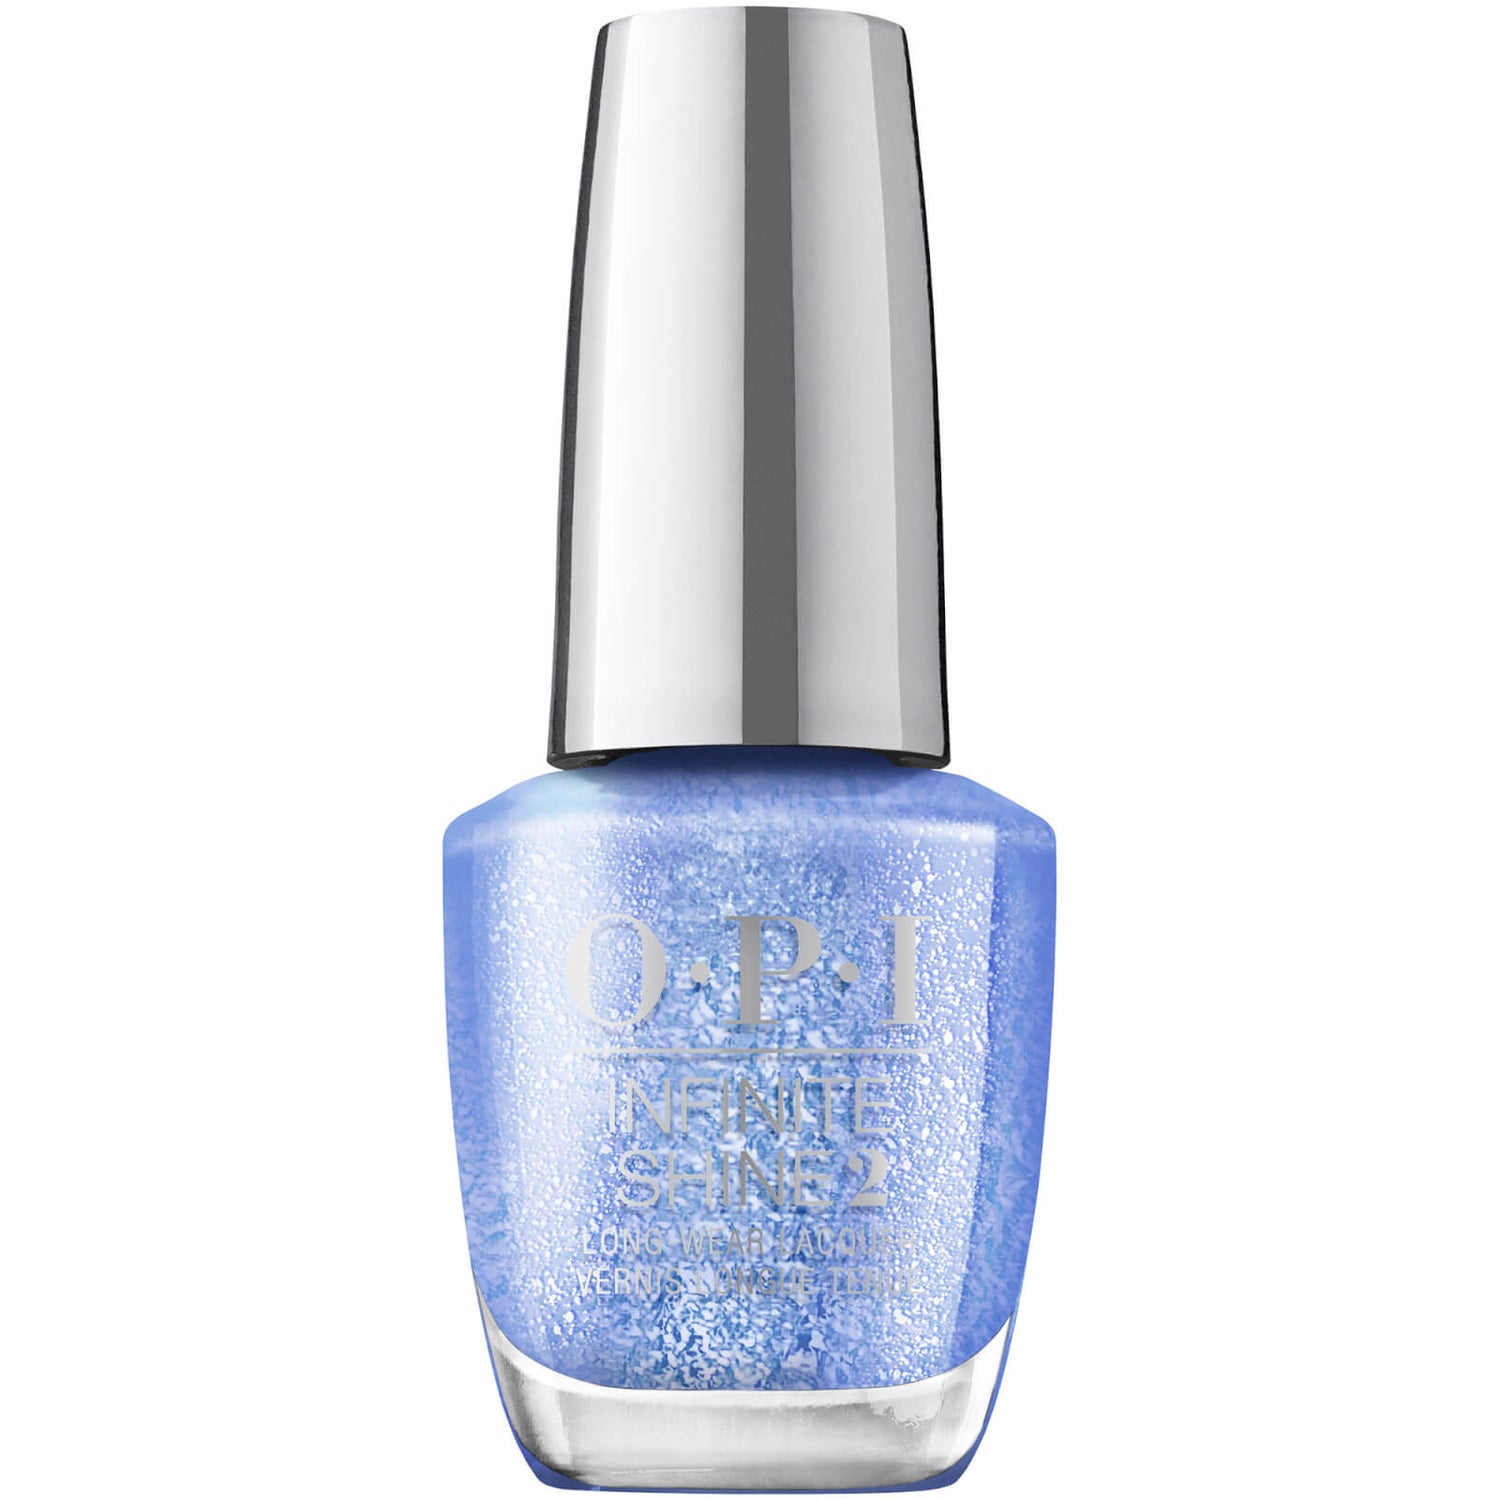 OPI Jewel Be Bold Collection 无限闪耀系列 长效指甲油 (多色系可选）- The Pearl of Your Dreams -15ml